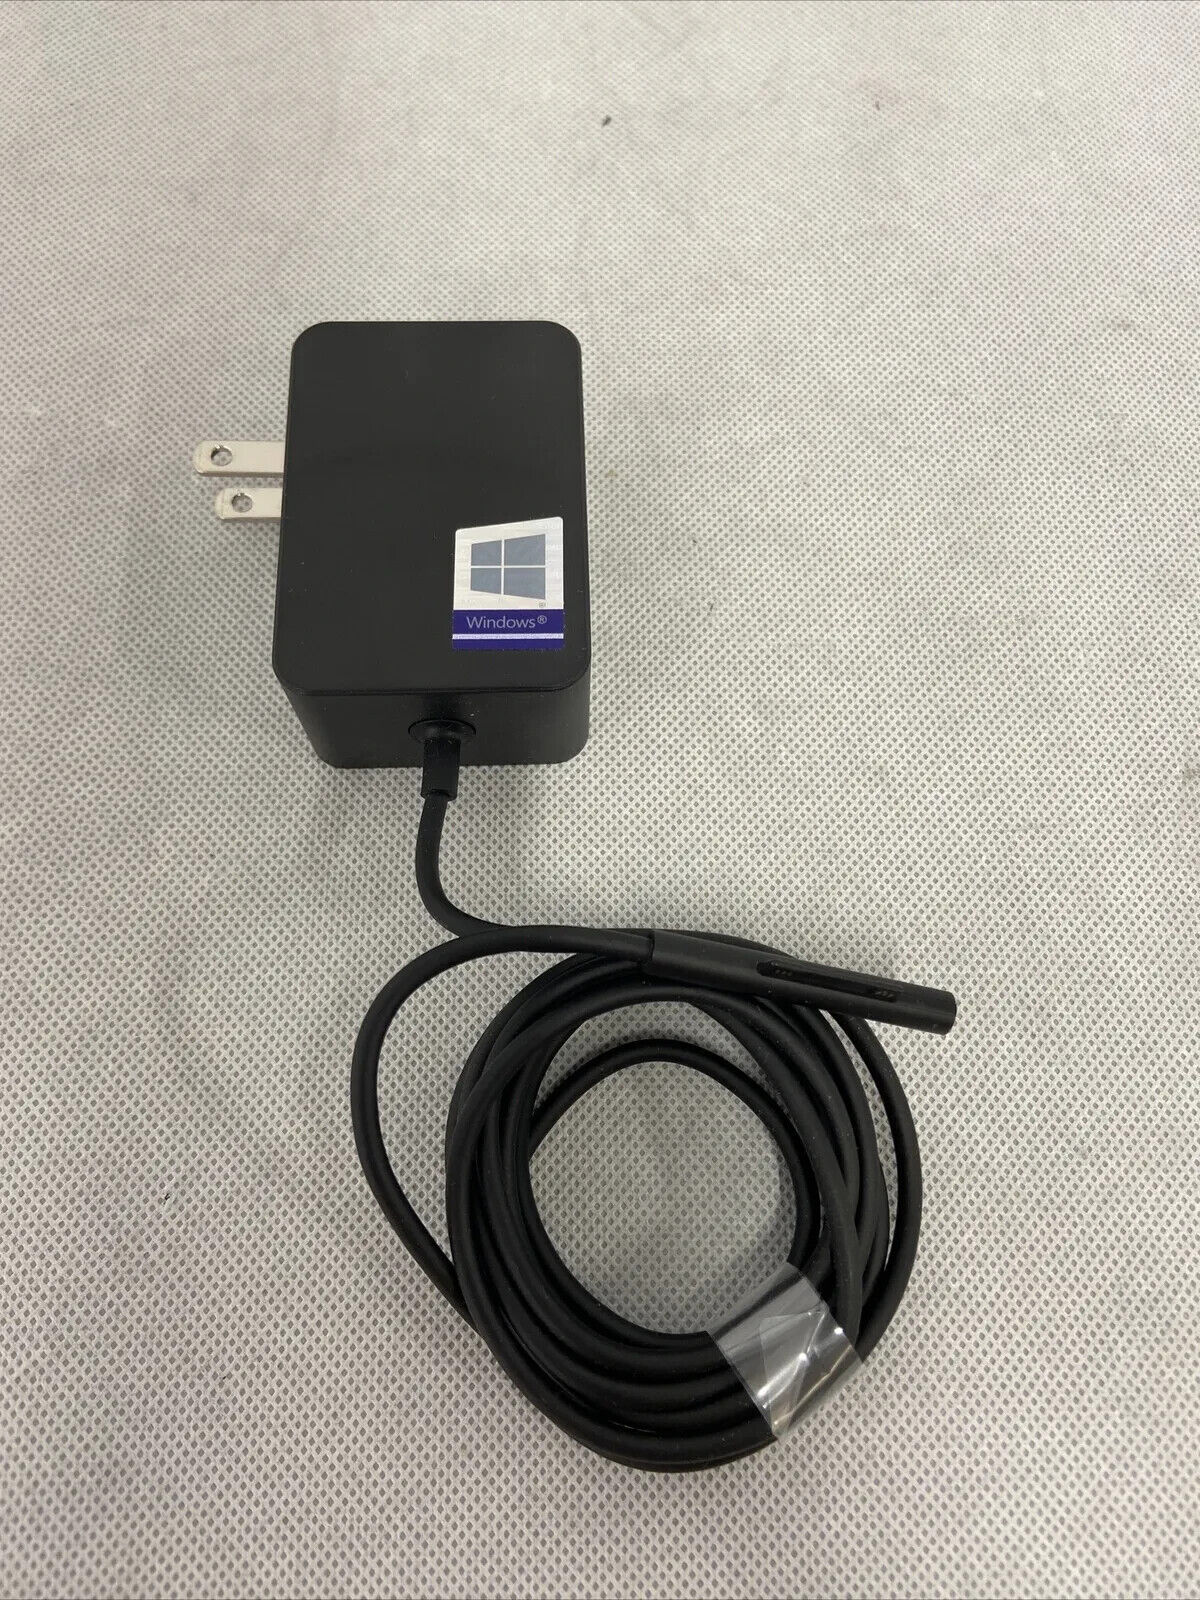 Genuine Microsoft Wall Charger For Surface Pro 4 5 6 Go, Model 1735 15V 24W